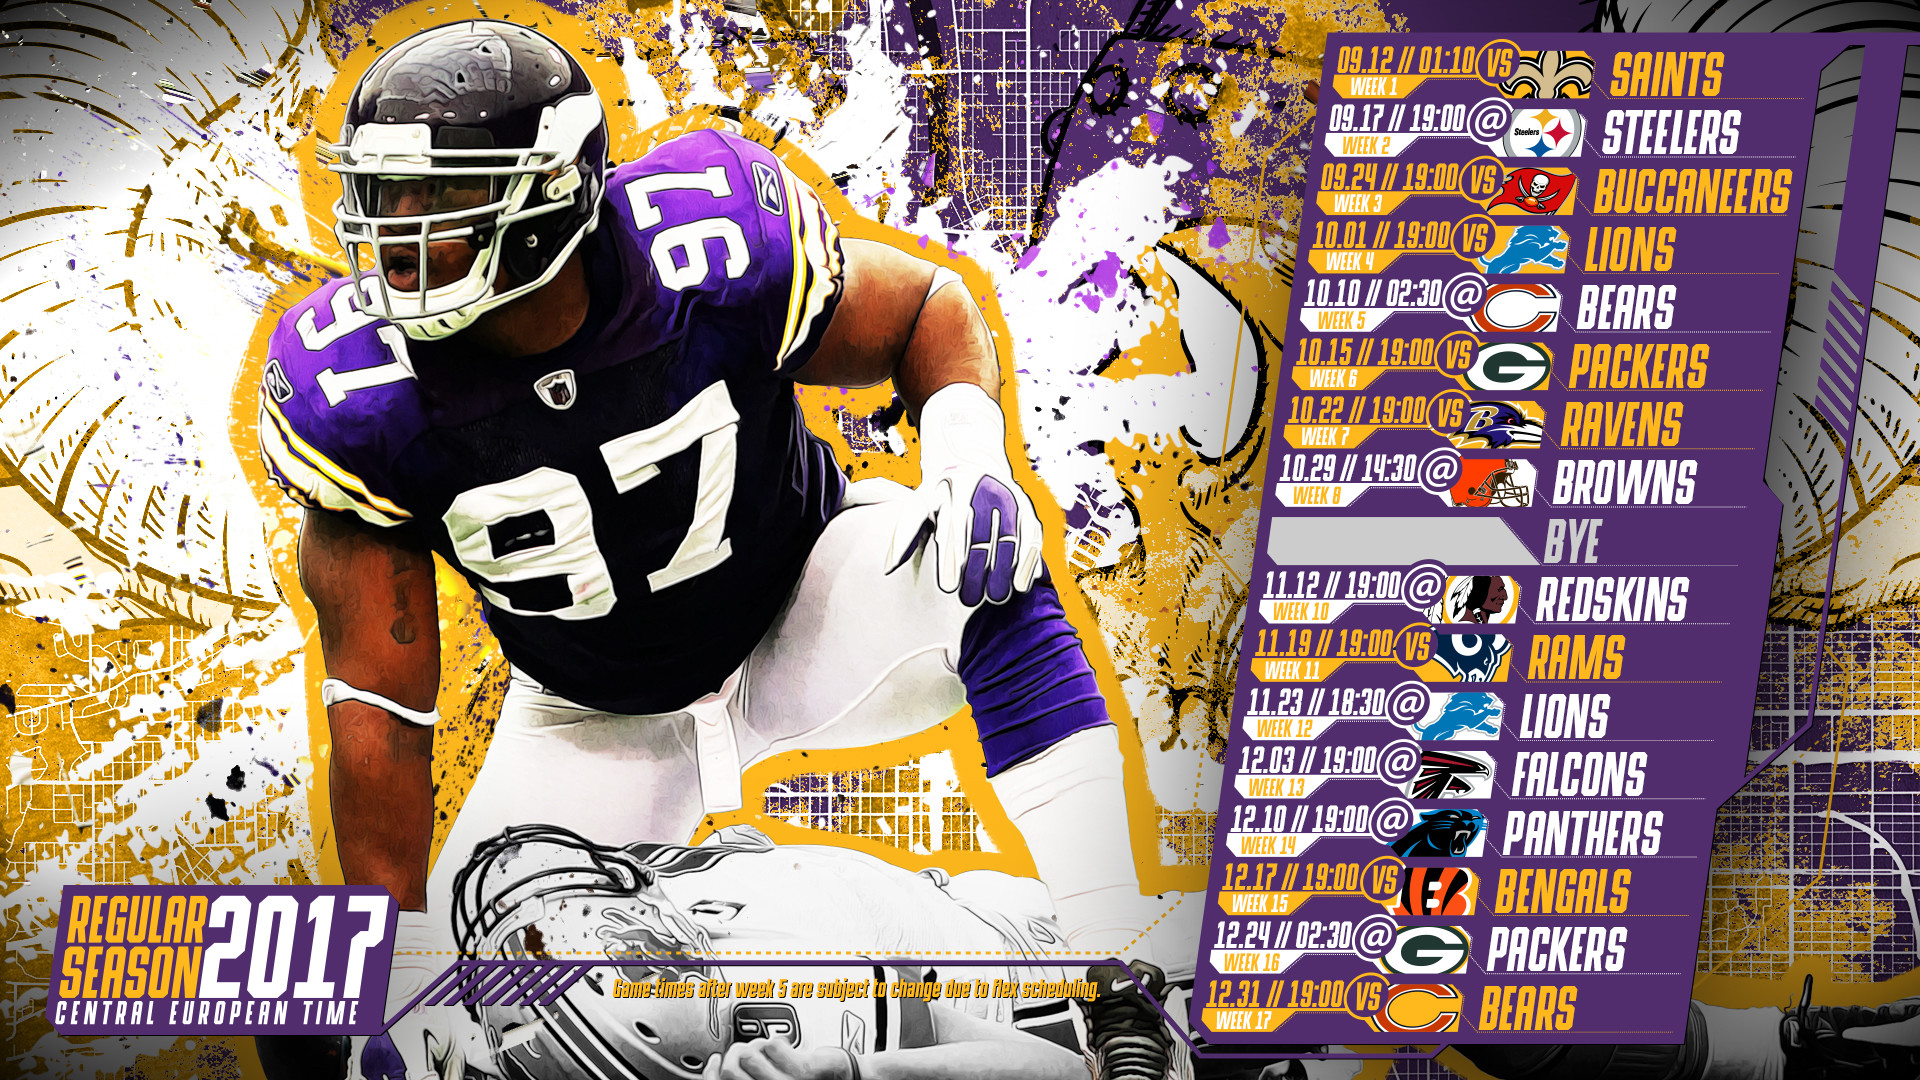 1920x1080 Schedule wallpaper for the Minnesota Vikings Regular Season, 2017 Central  European Time. Made by